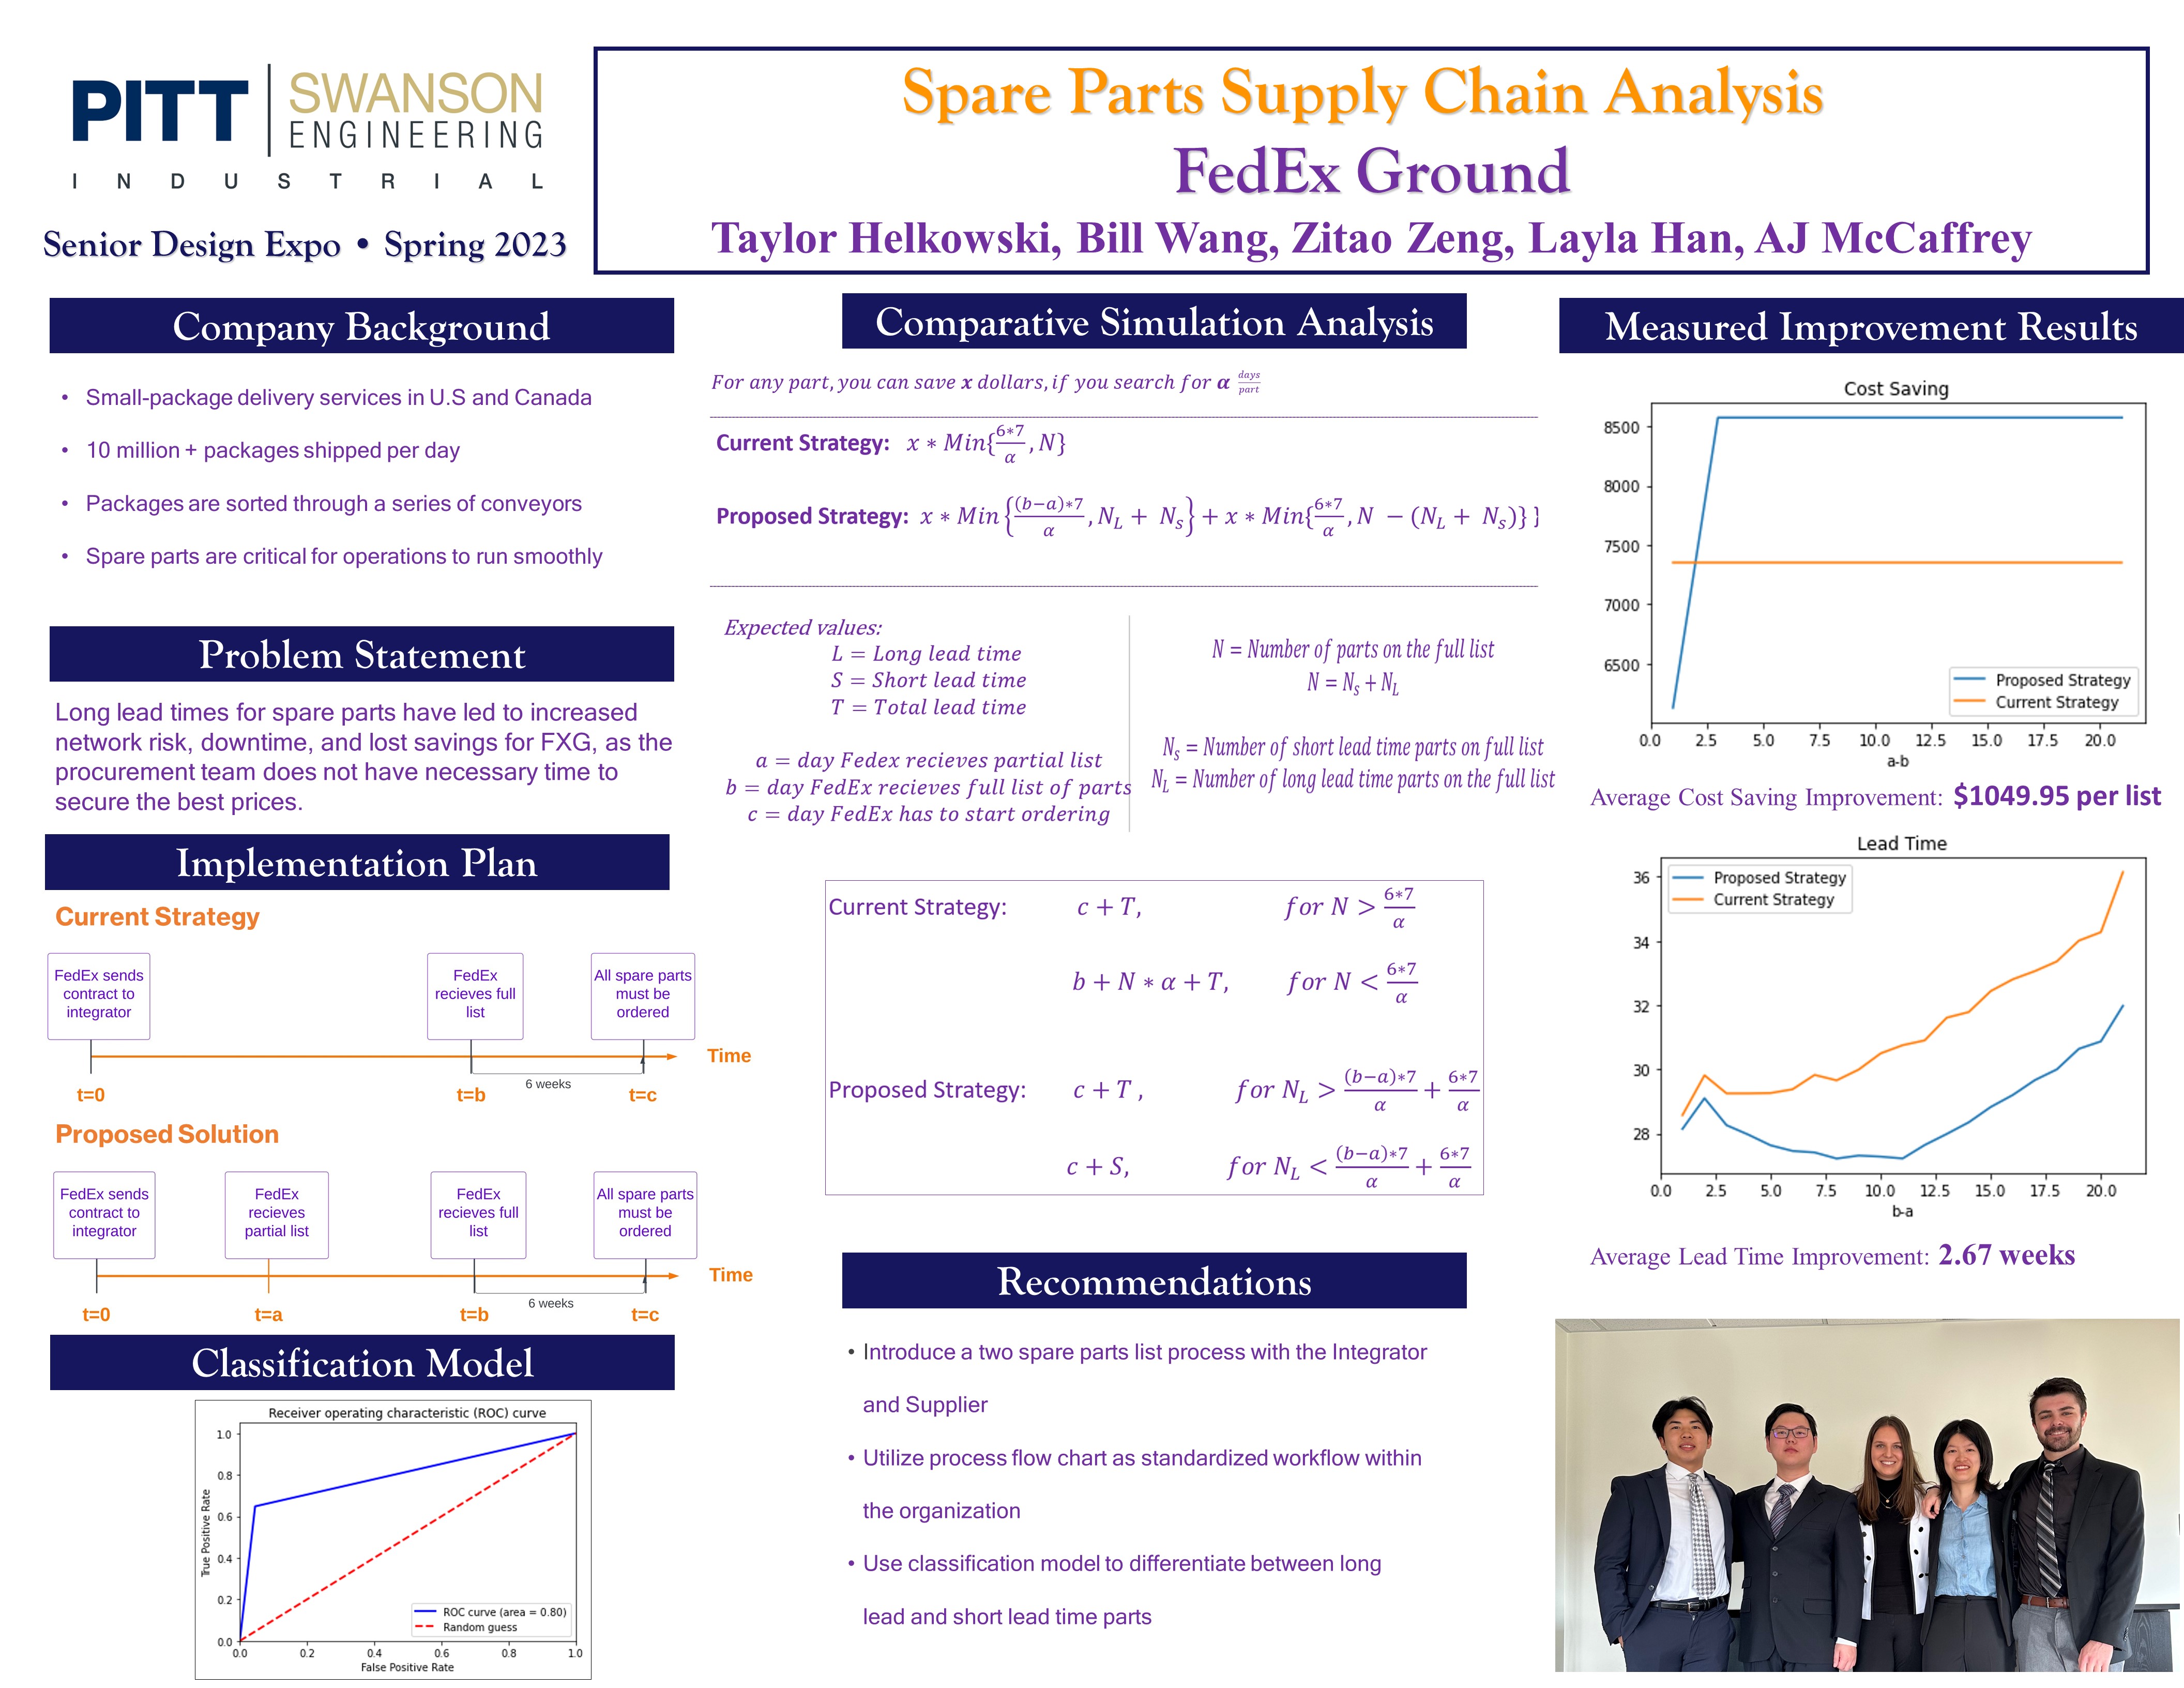 fedex ground spare parts supply chain analysis project poster